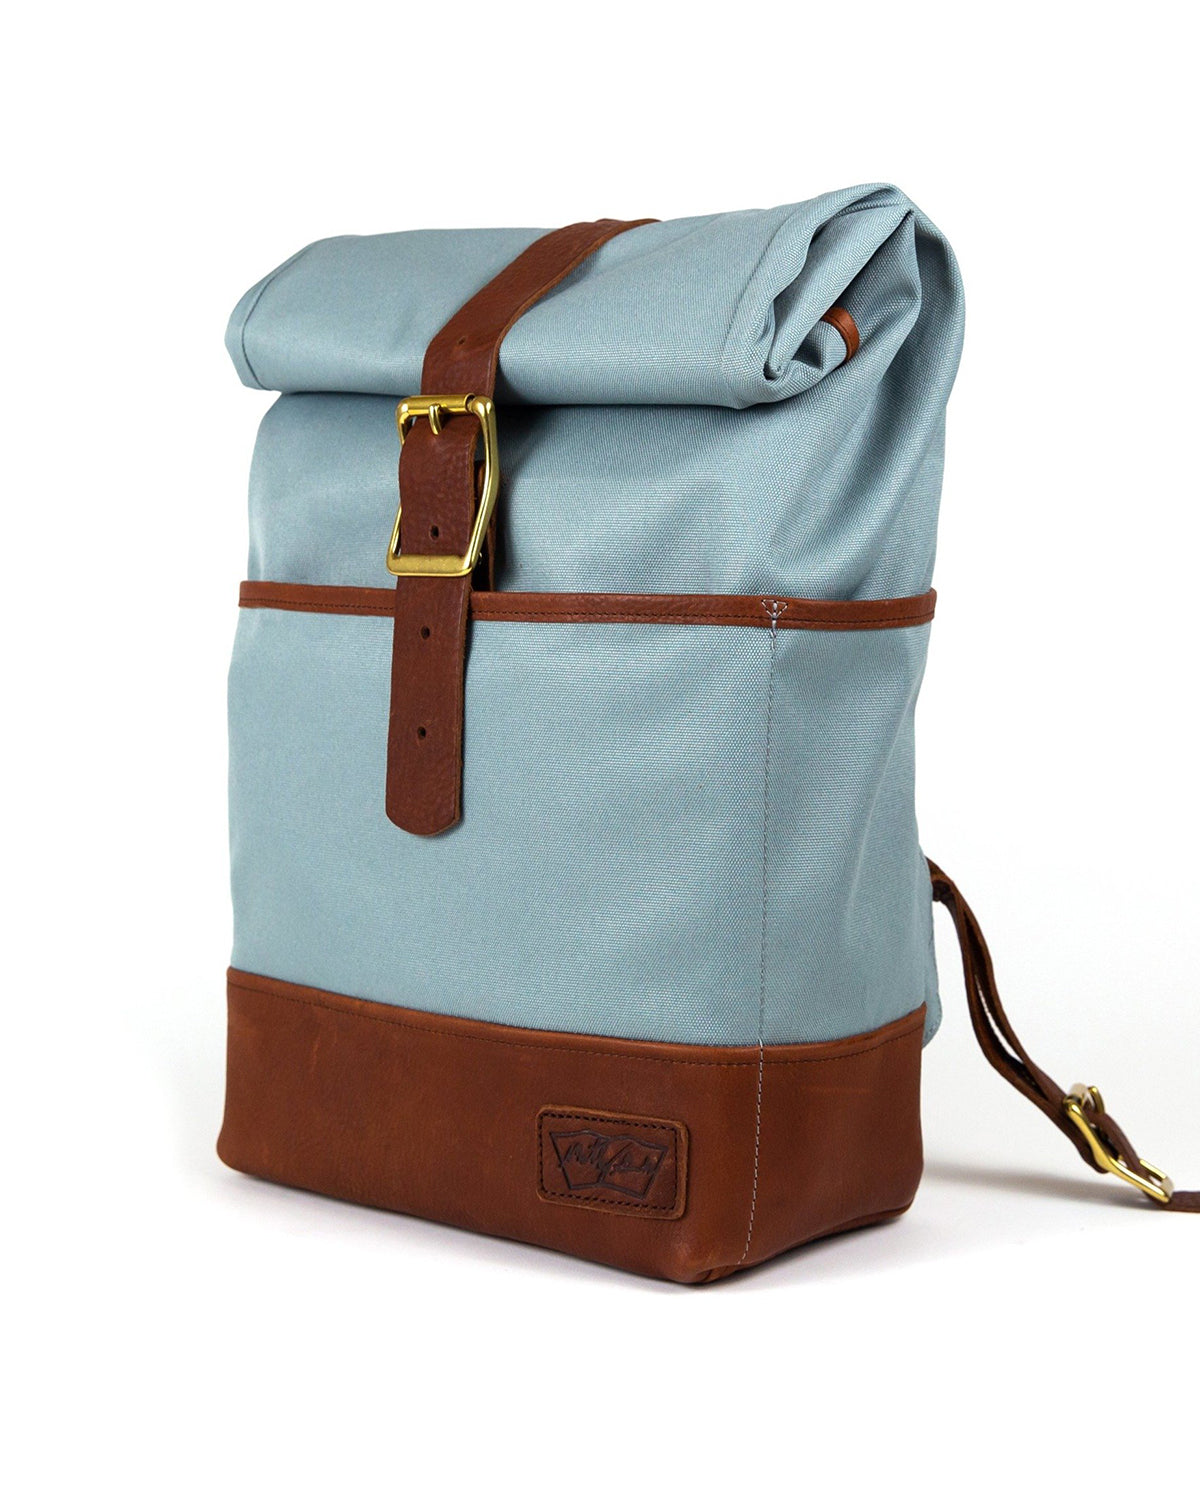 Daypack in Light Blue with Brown Leather "Fog Edition" - Motley Goods